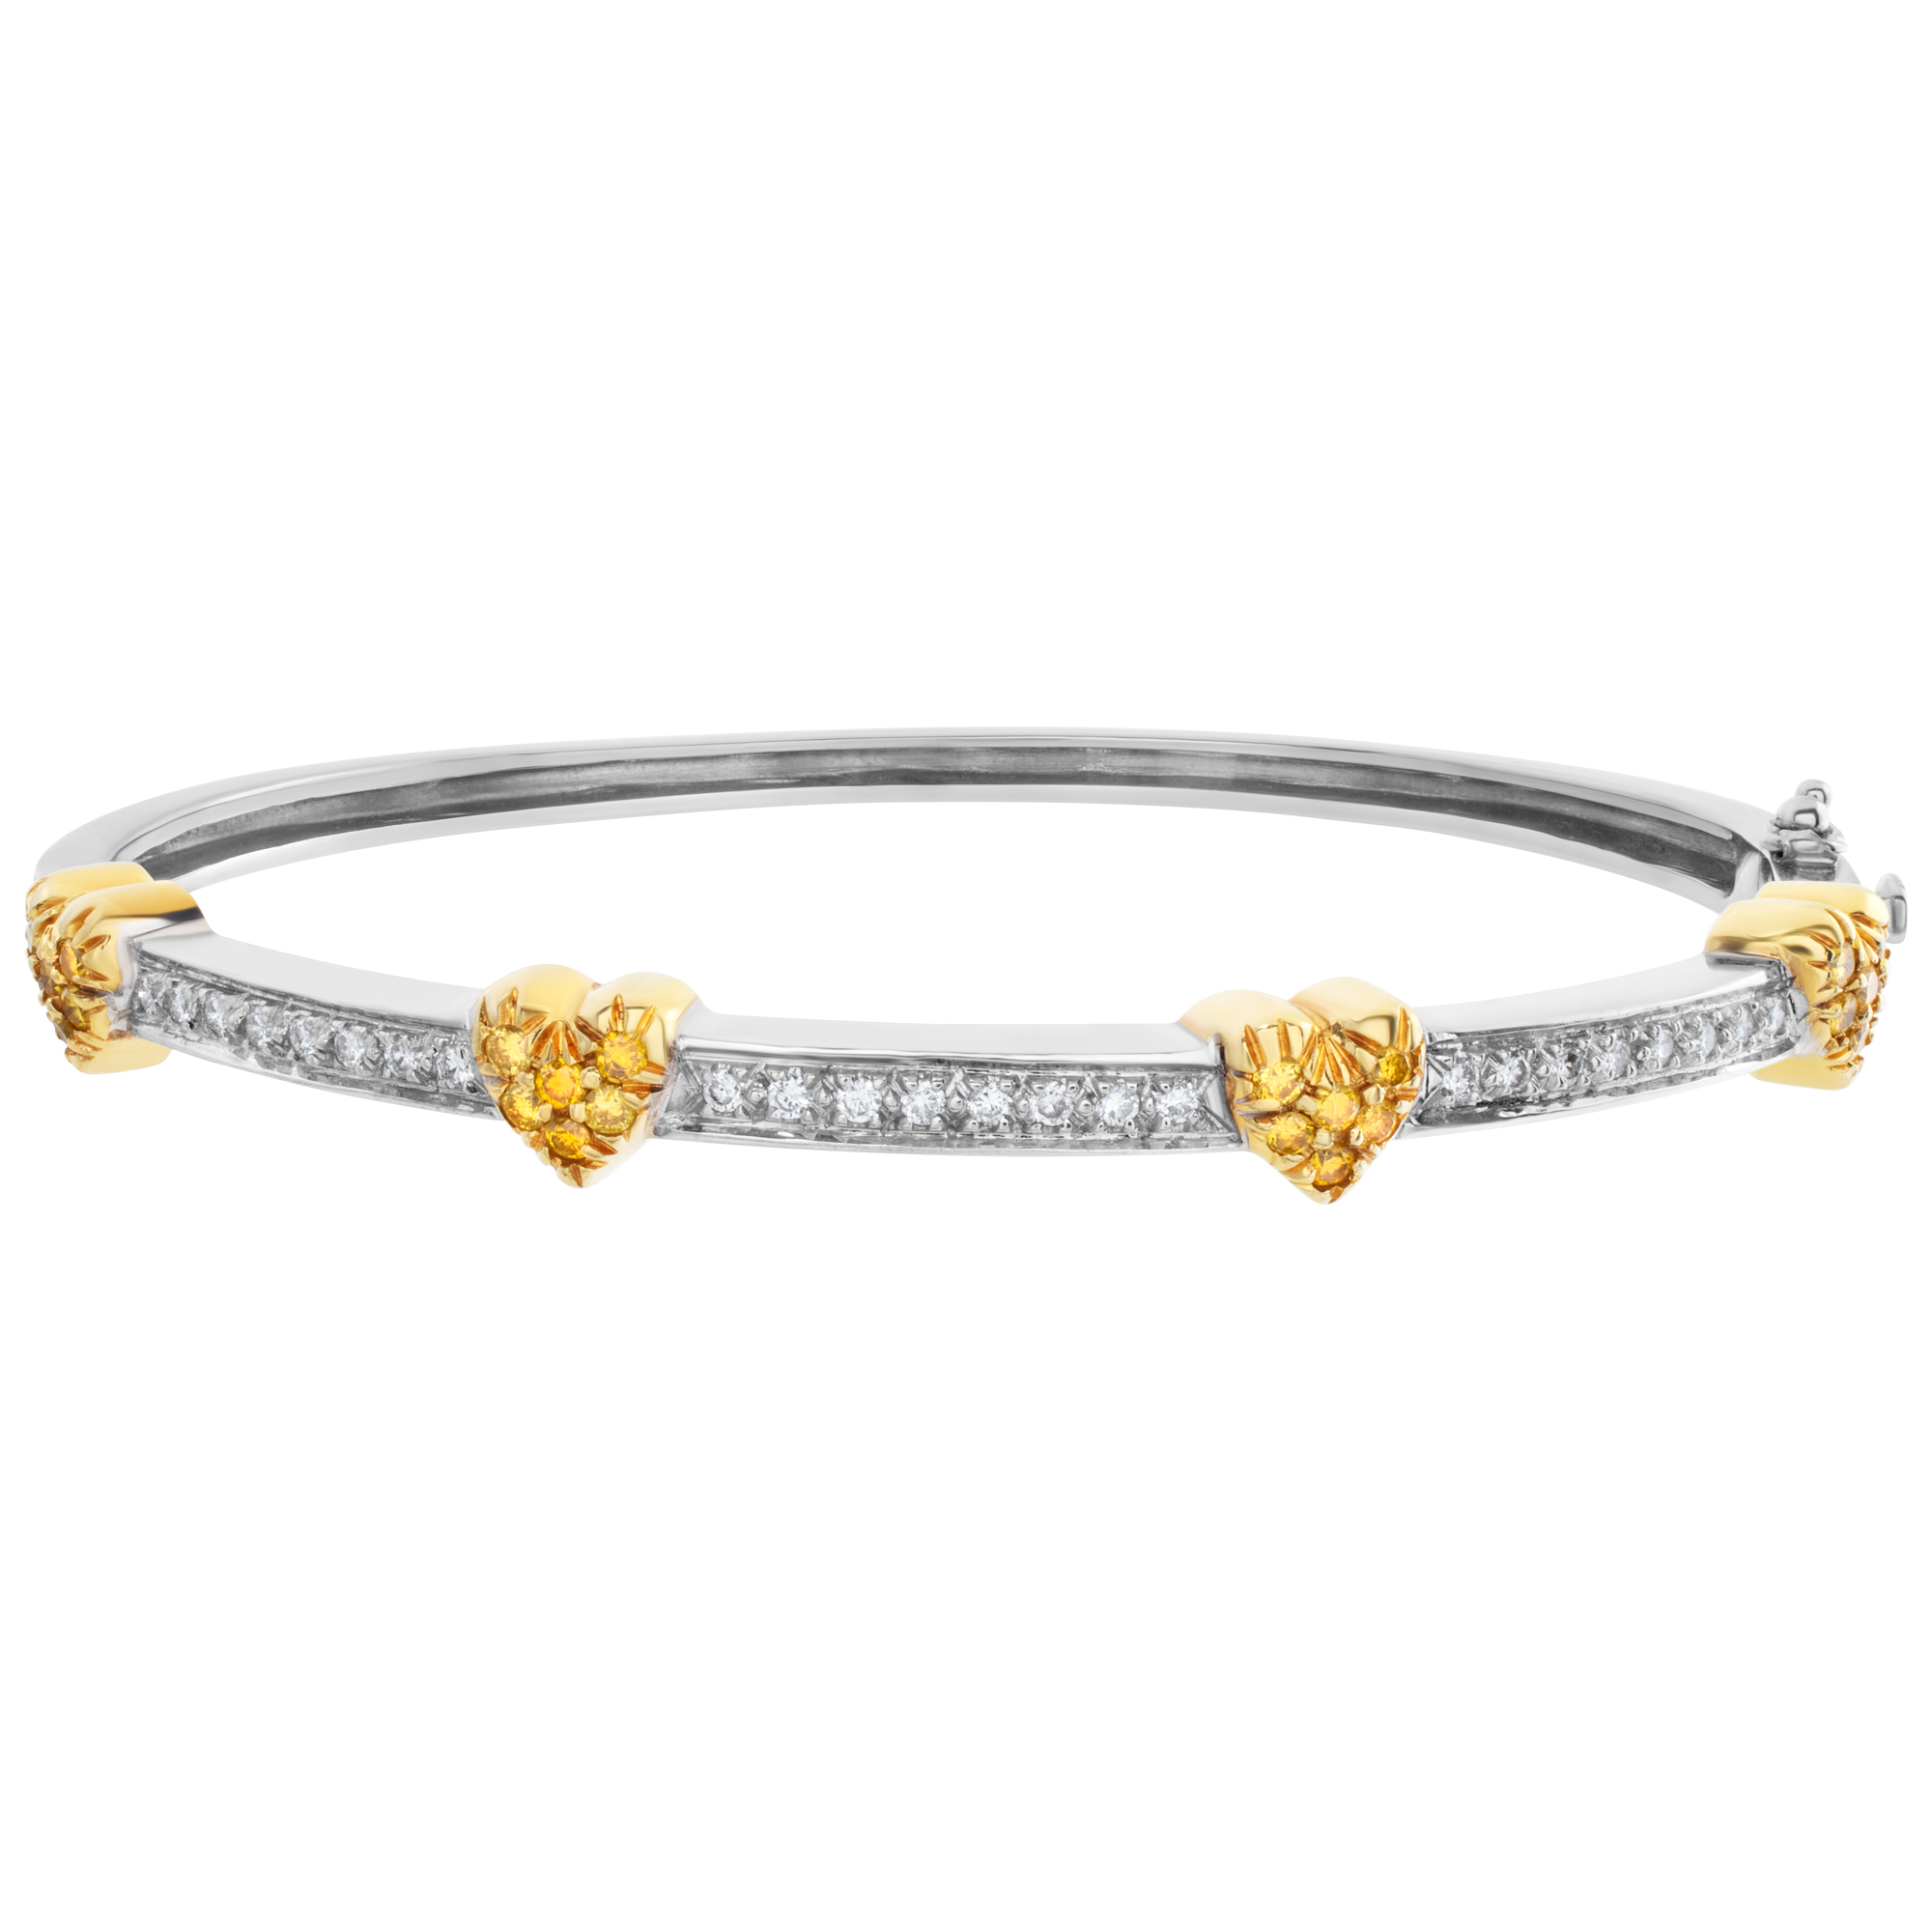 White and yellow diamond heart bangle in platinum and 18k yellow gold. Approximately 0.54 carats in white & yellow diamonds. image 1